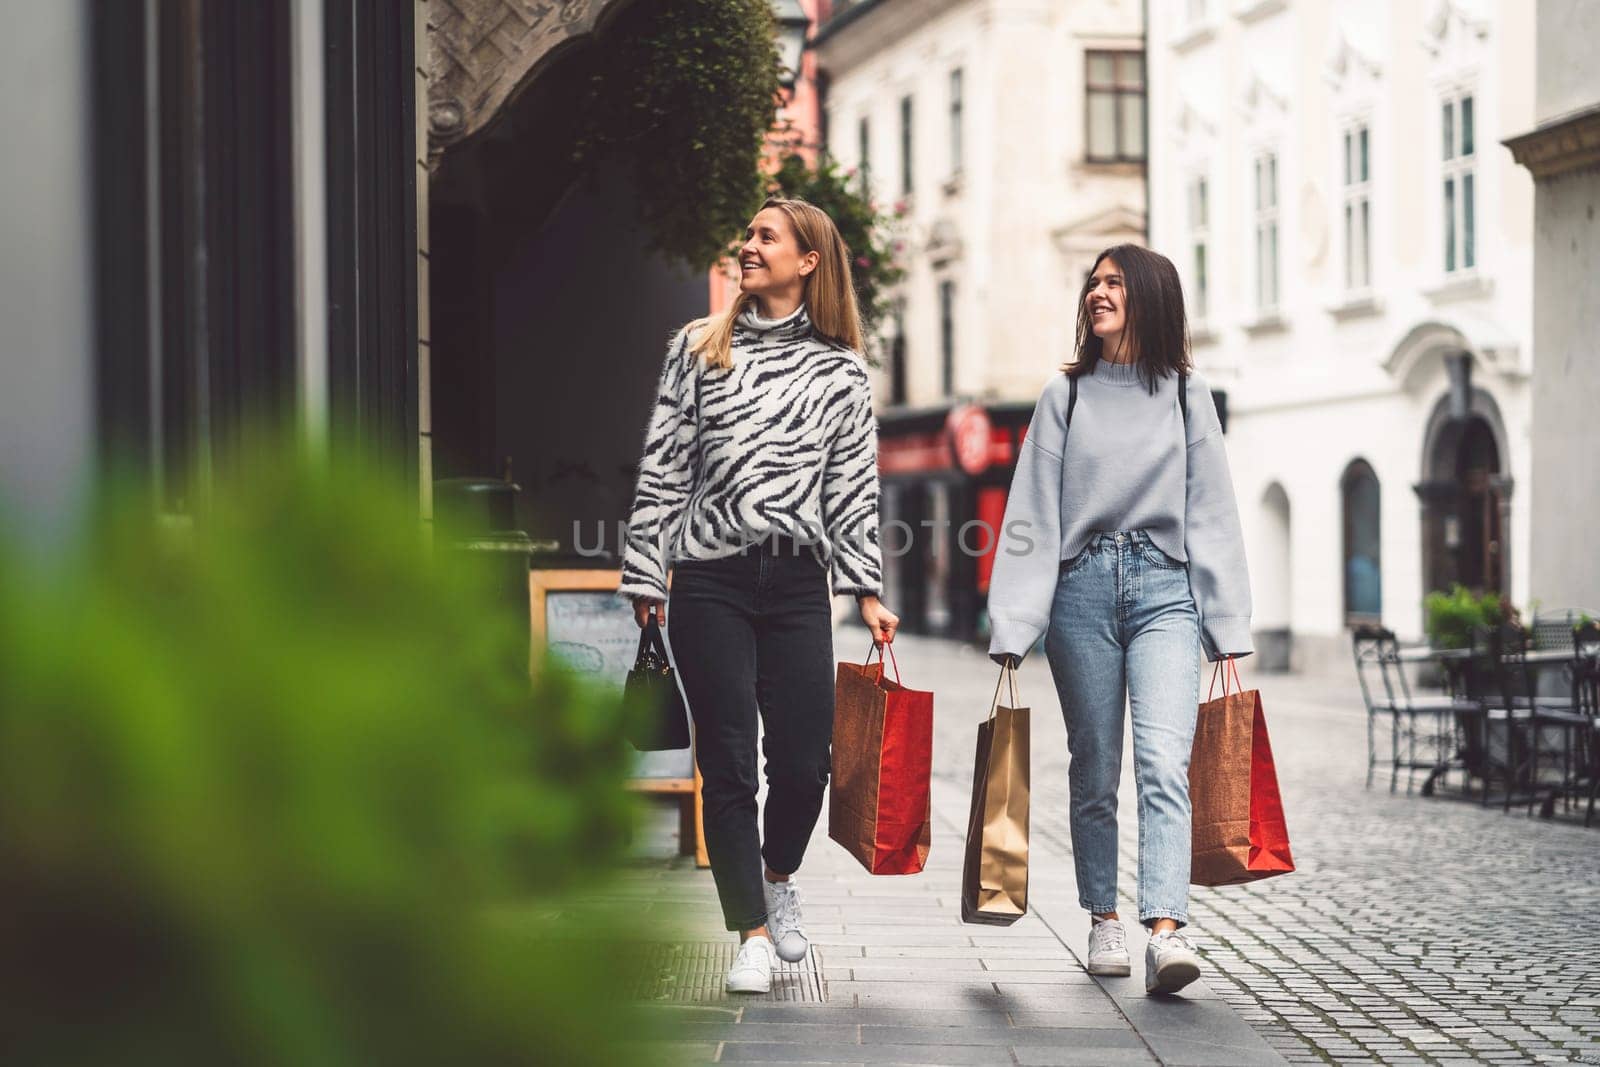 Two young caucasian women having fun on city street outdoors - Best friends enjoying a holiday day out together - Happy lifestyle, youth and young females concept. High quality photo